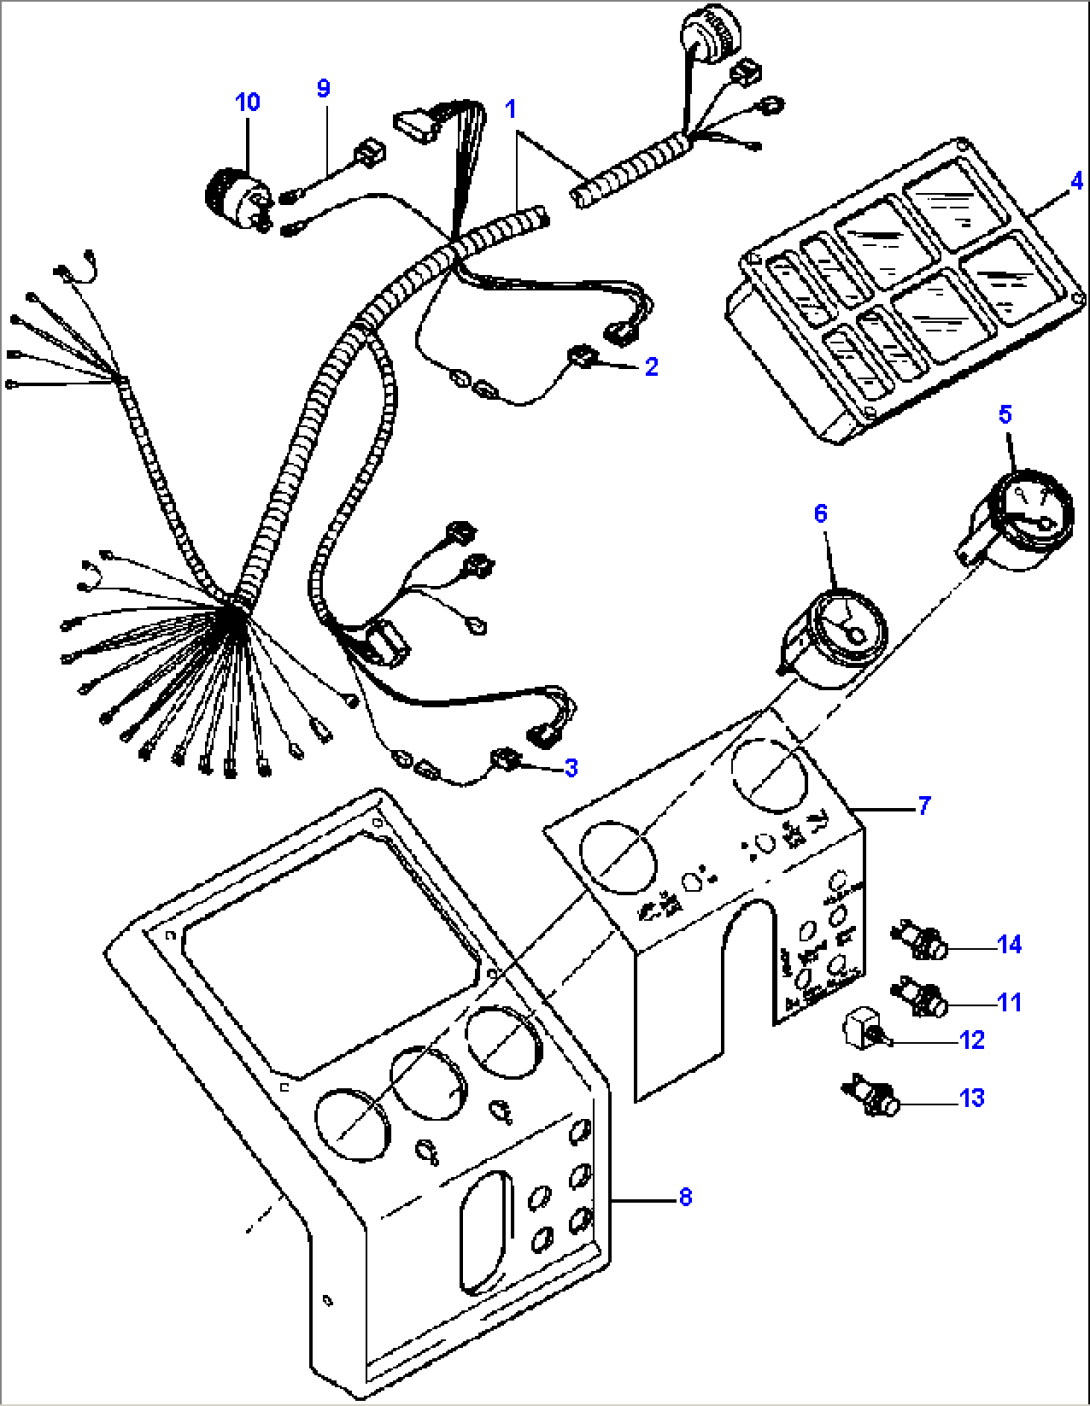 STEERING CONSOLE INSTRUMENT PANEL